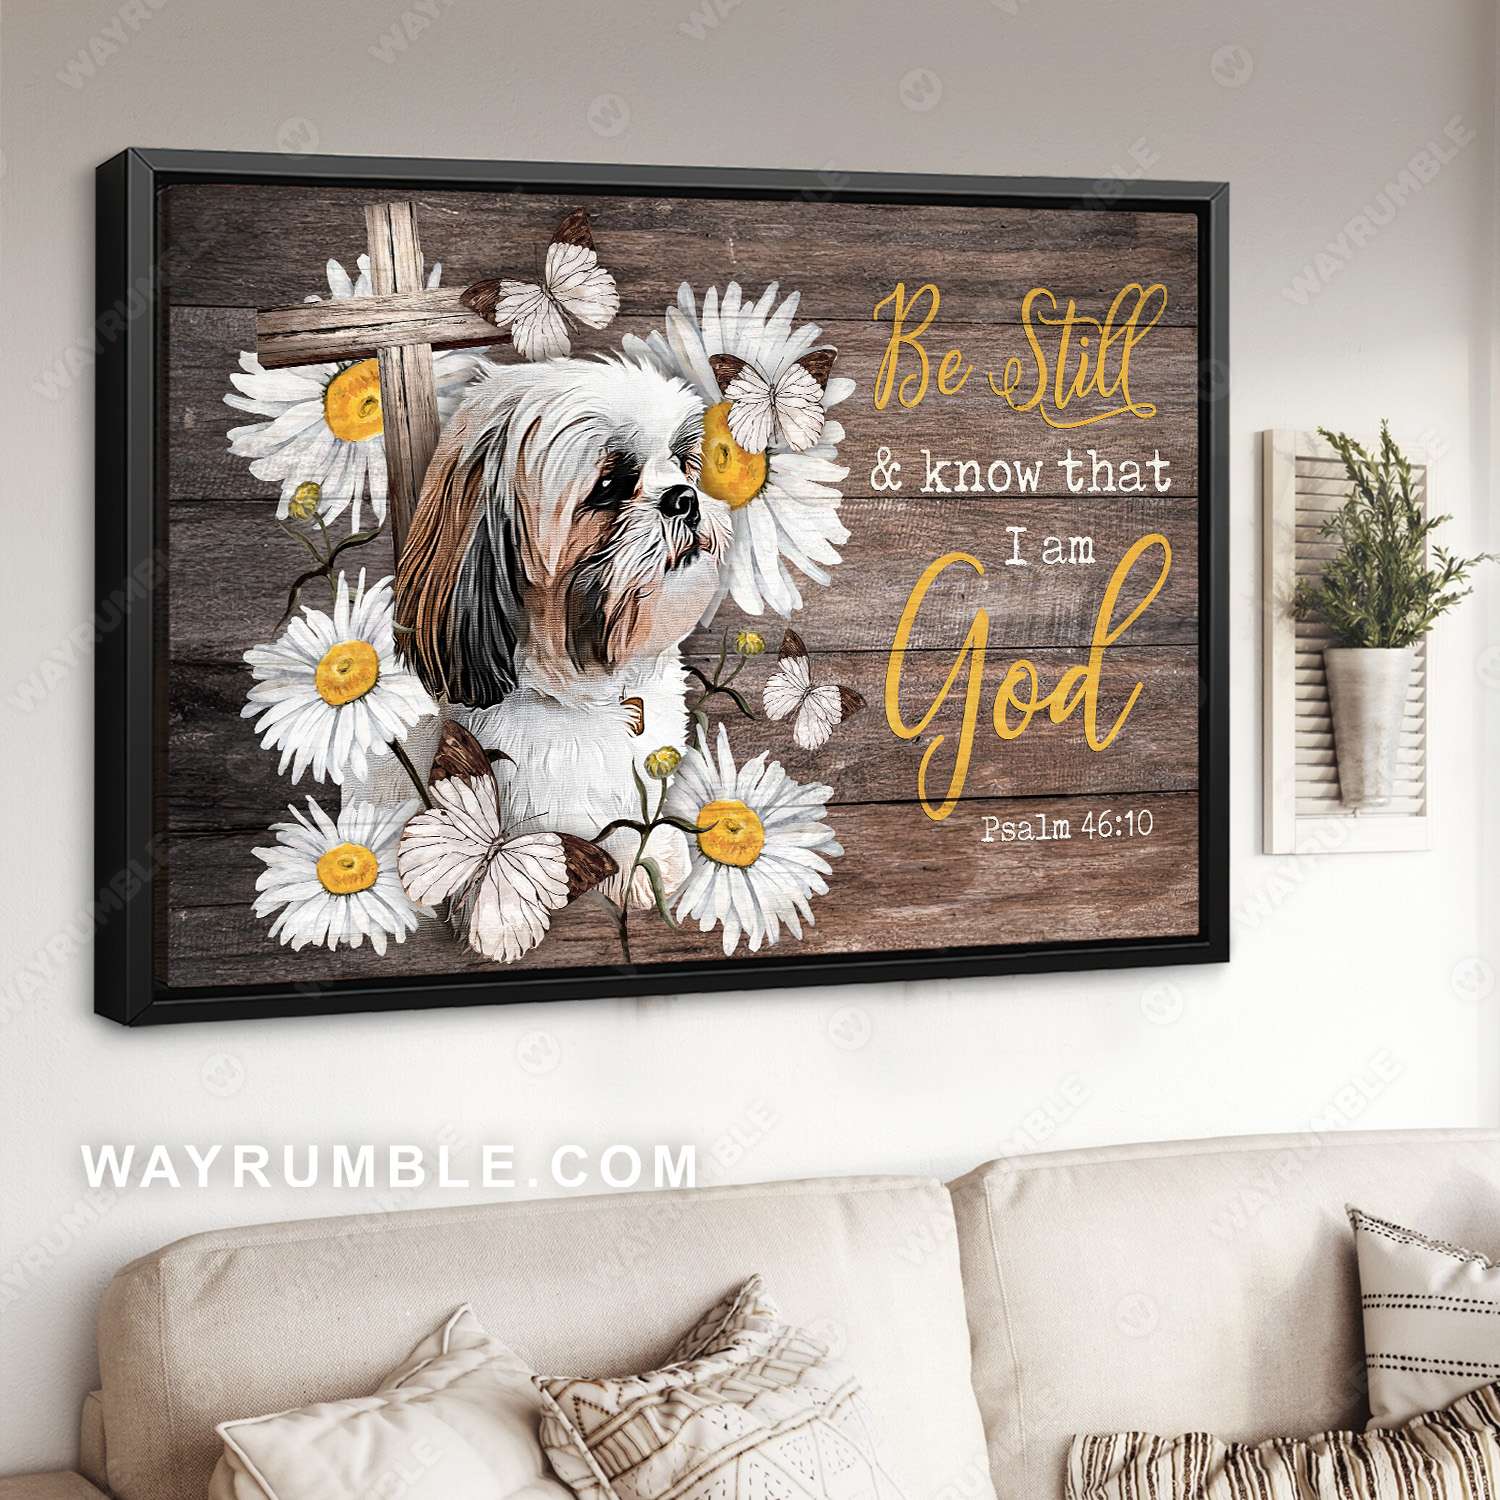 Shihtzu drawing, Be still and know that I am God - Dog Landscape Canvas Prints, Wall Art